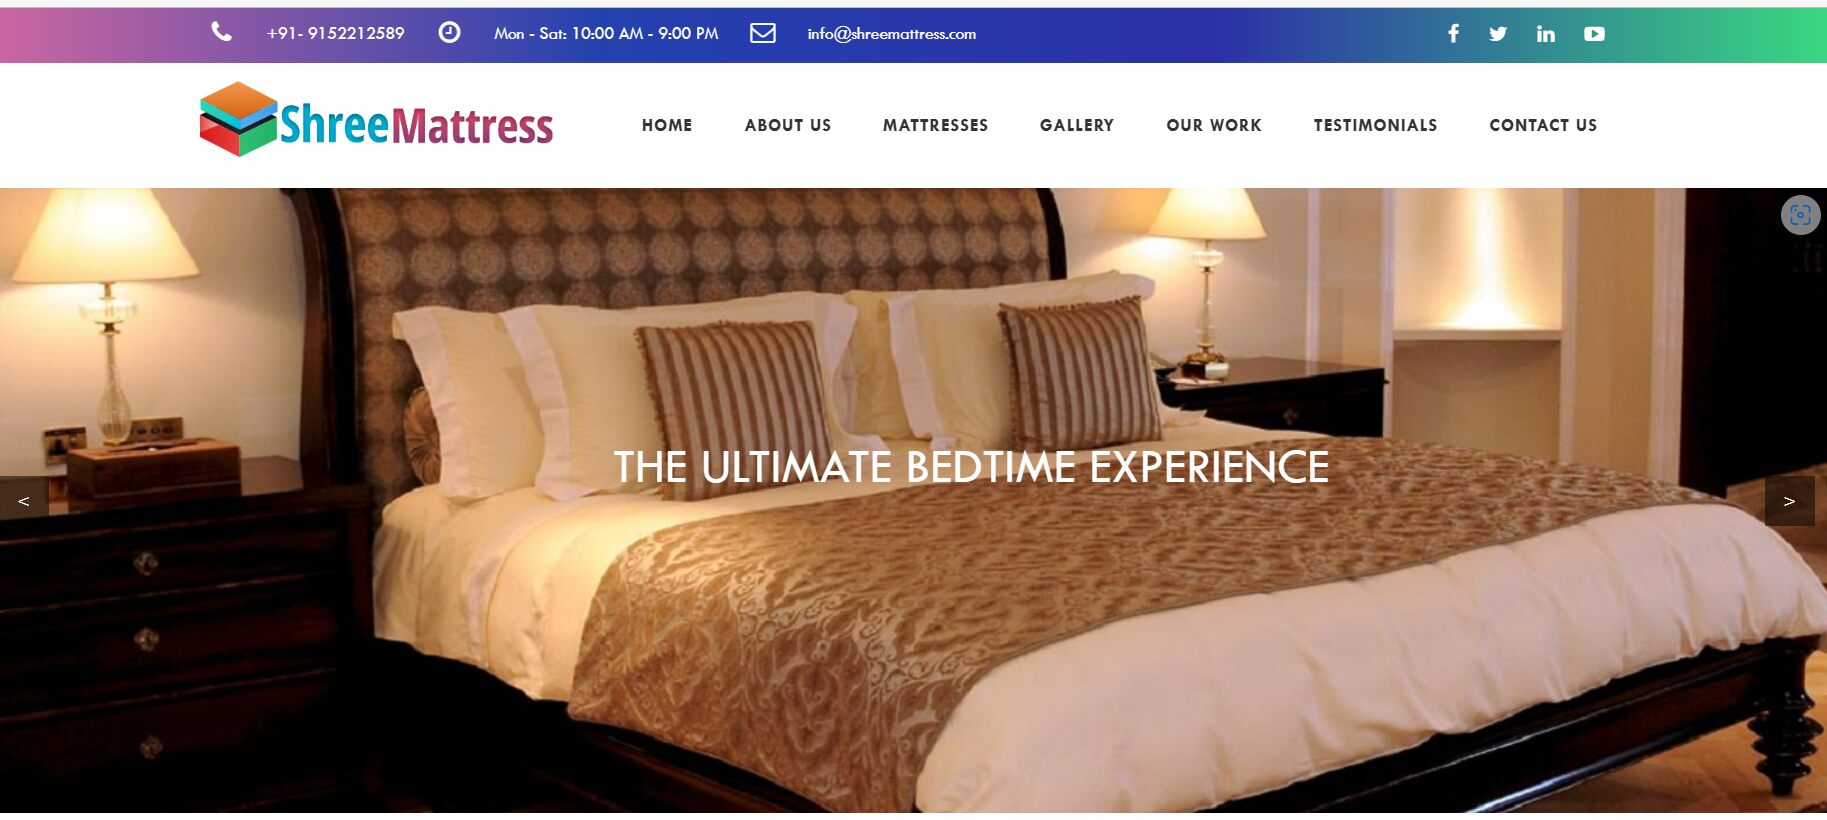 Ourwork-Shree-Mattress-BSIT_Software_Services_Web_And_App_Development_Company_India